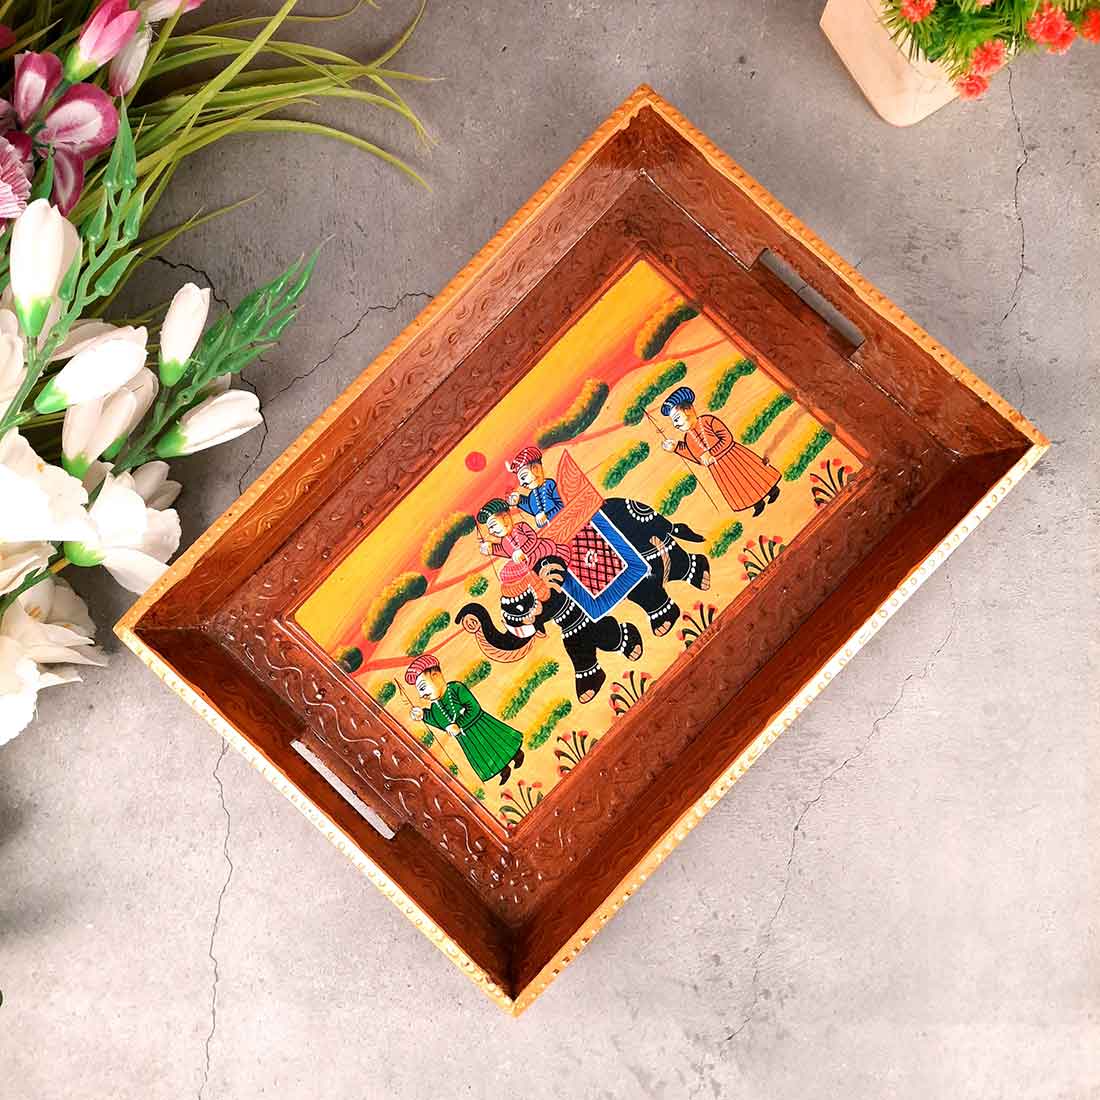 Serving Wooden Tray | Decorative Tray - for Kitchen, Serving & Gifting - 13 Inch - Apkamart#Style_Pack of 1